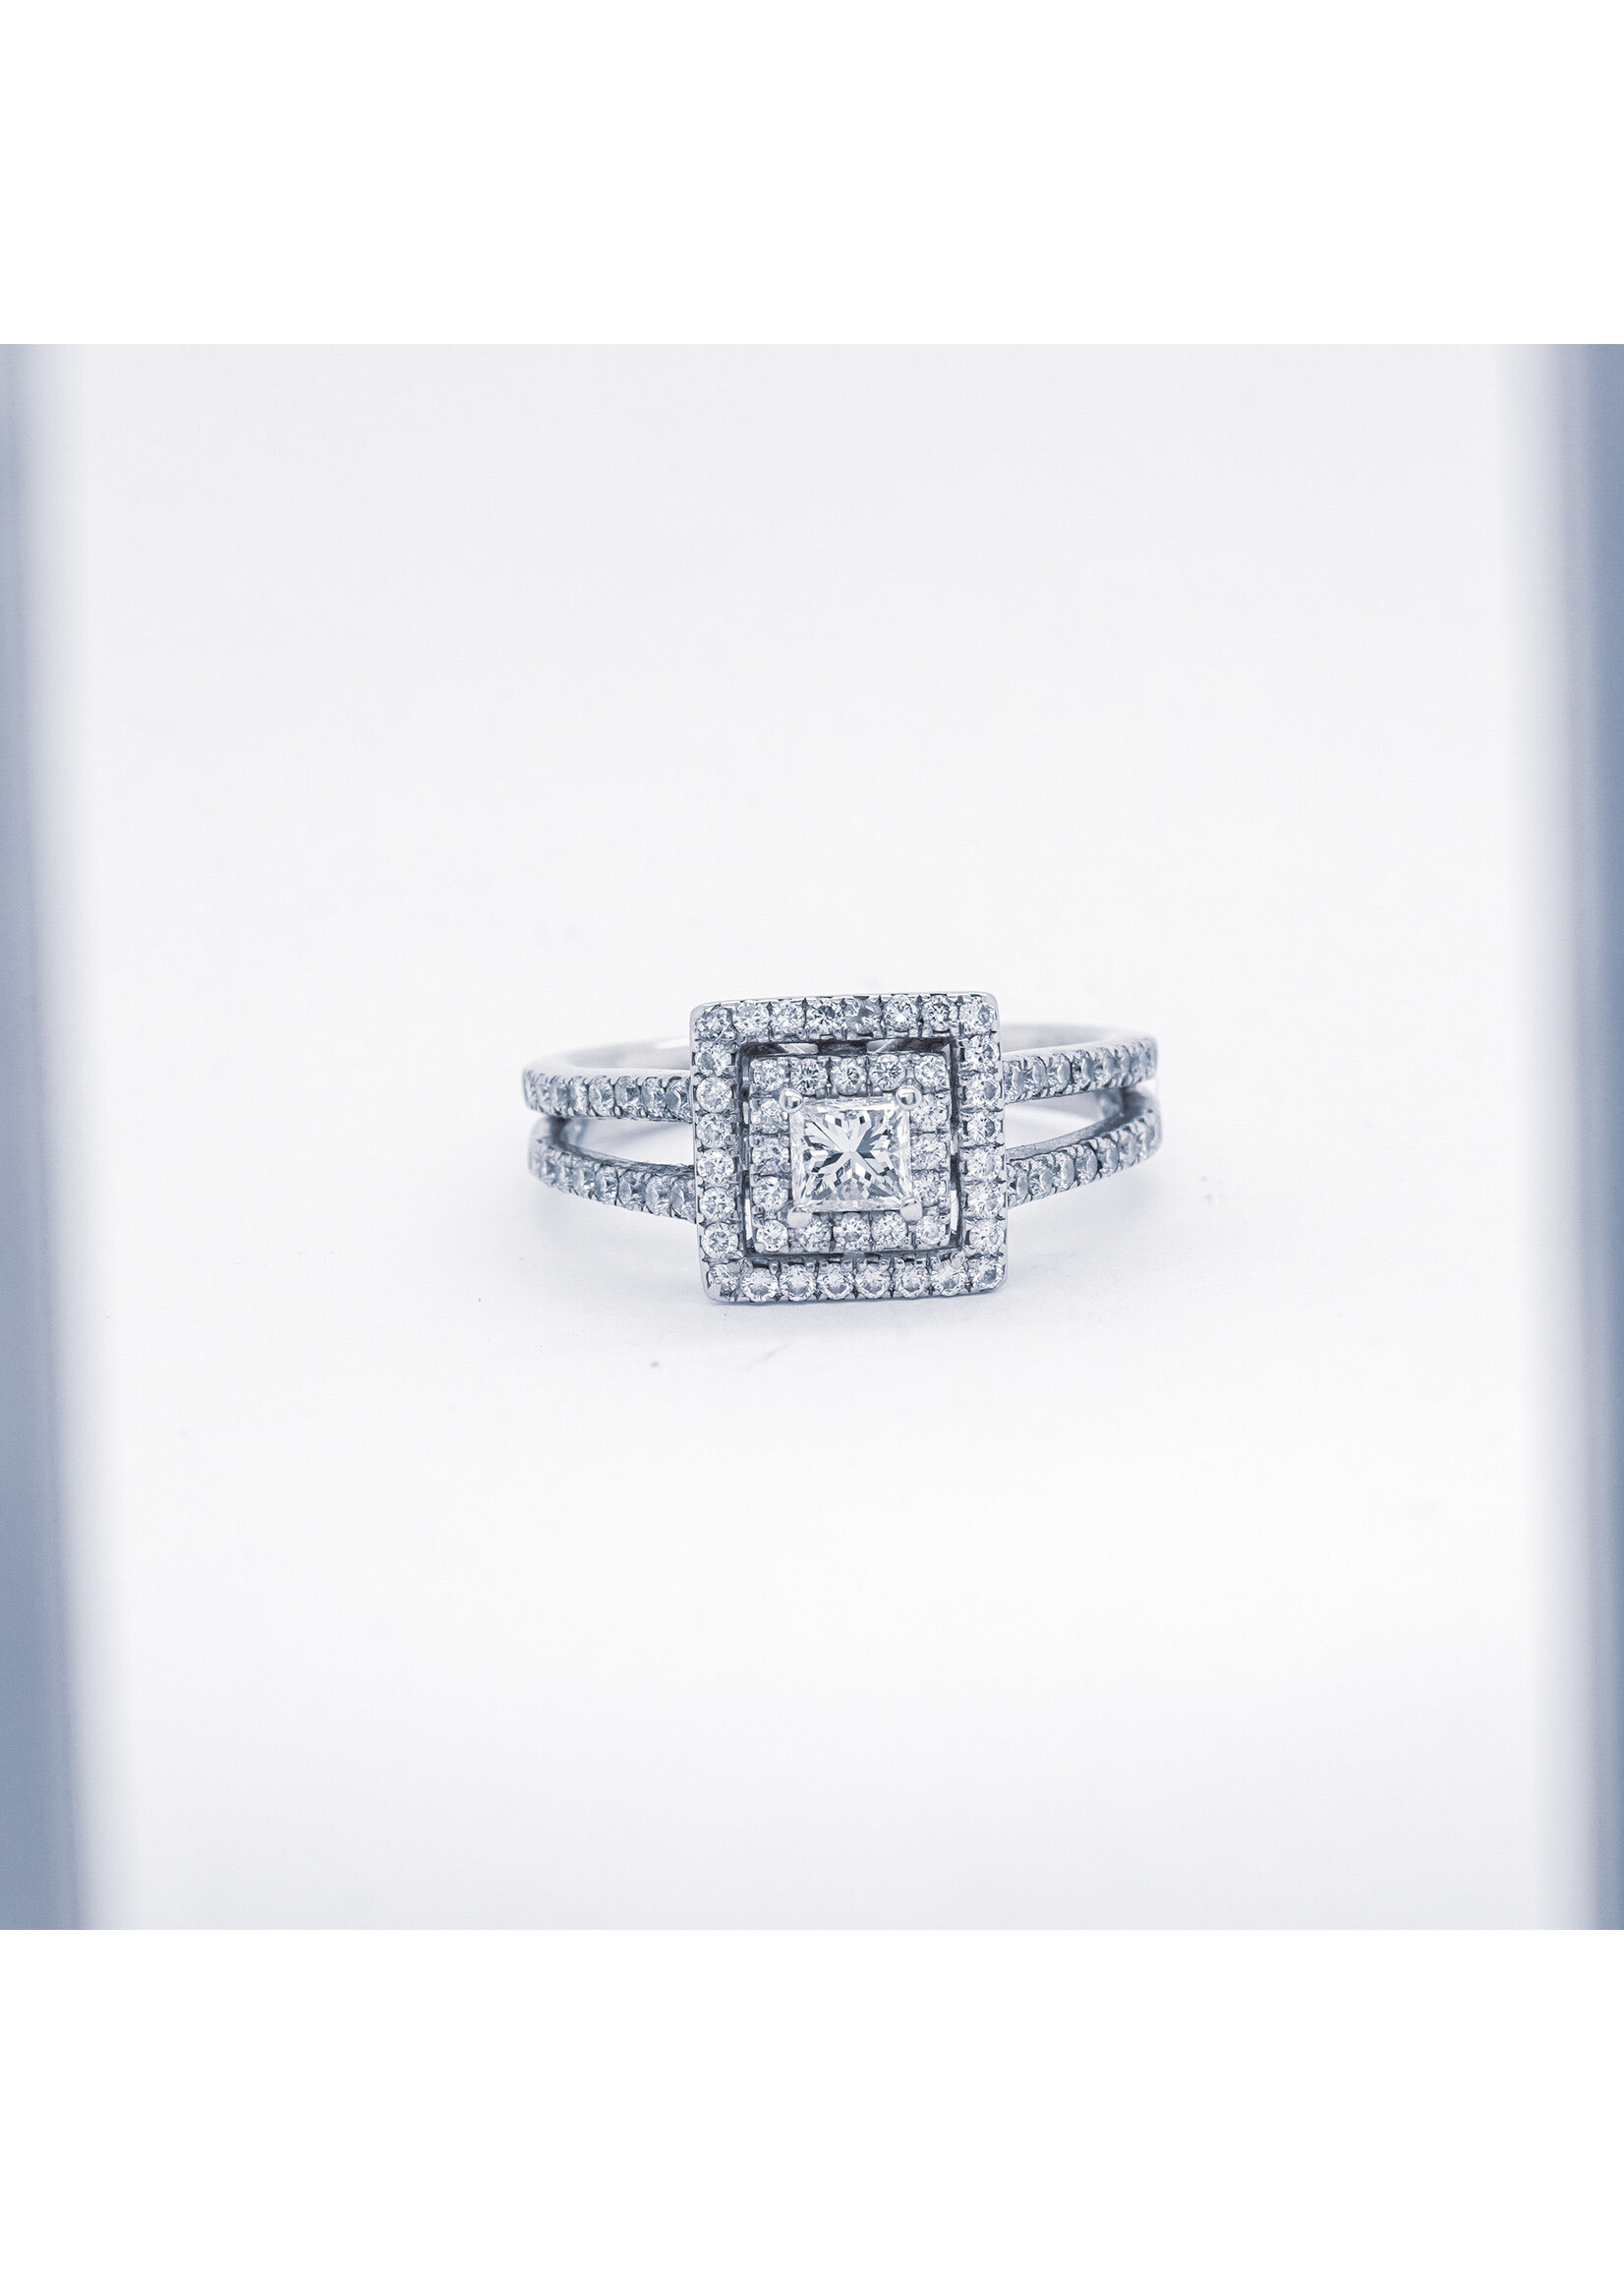 18KW 4.65g 1.0TW (.30ctr) H/SI1 Princess Cut Diamond Double Halo Engagement Ring (size 6.25)